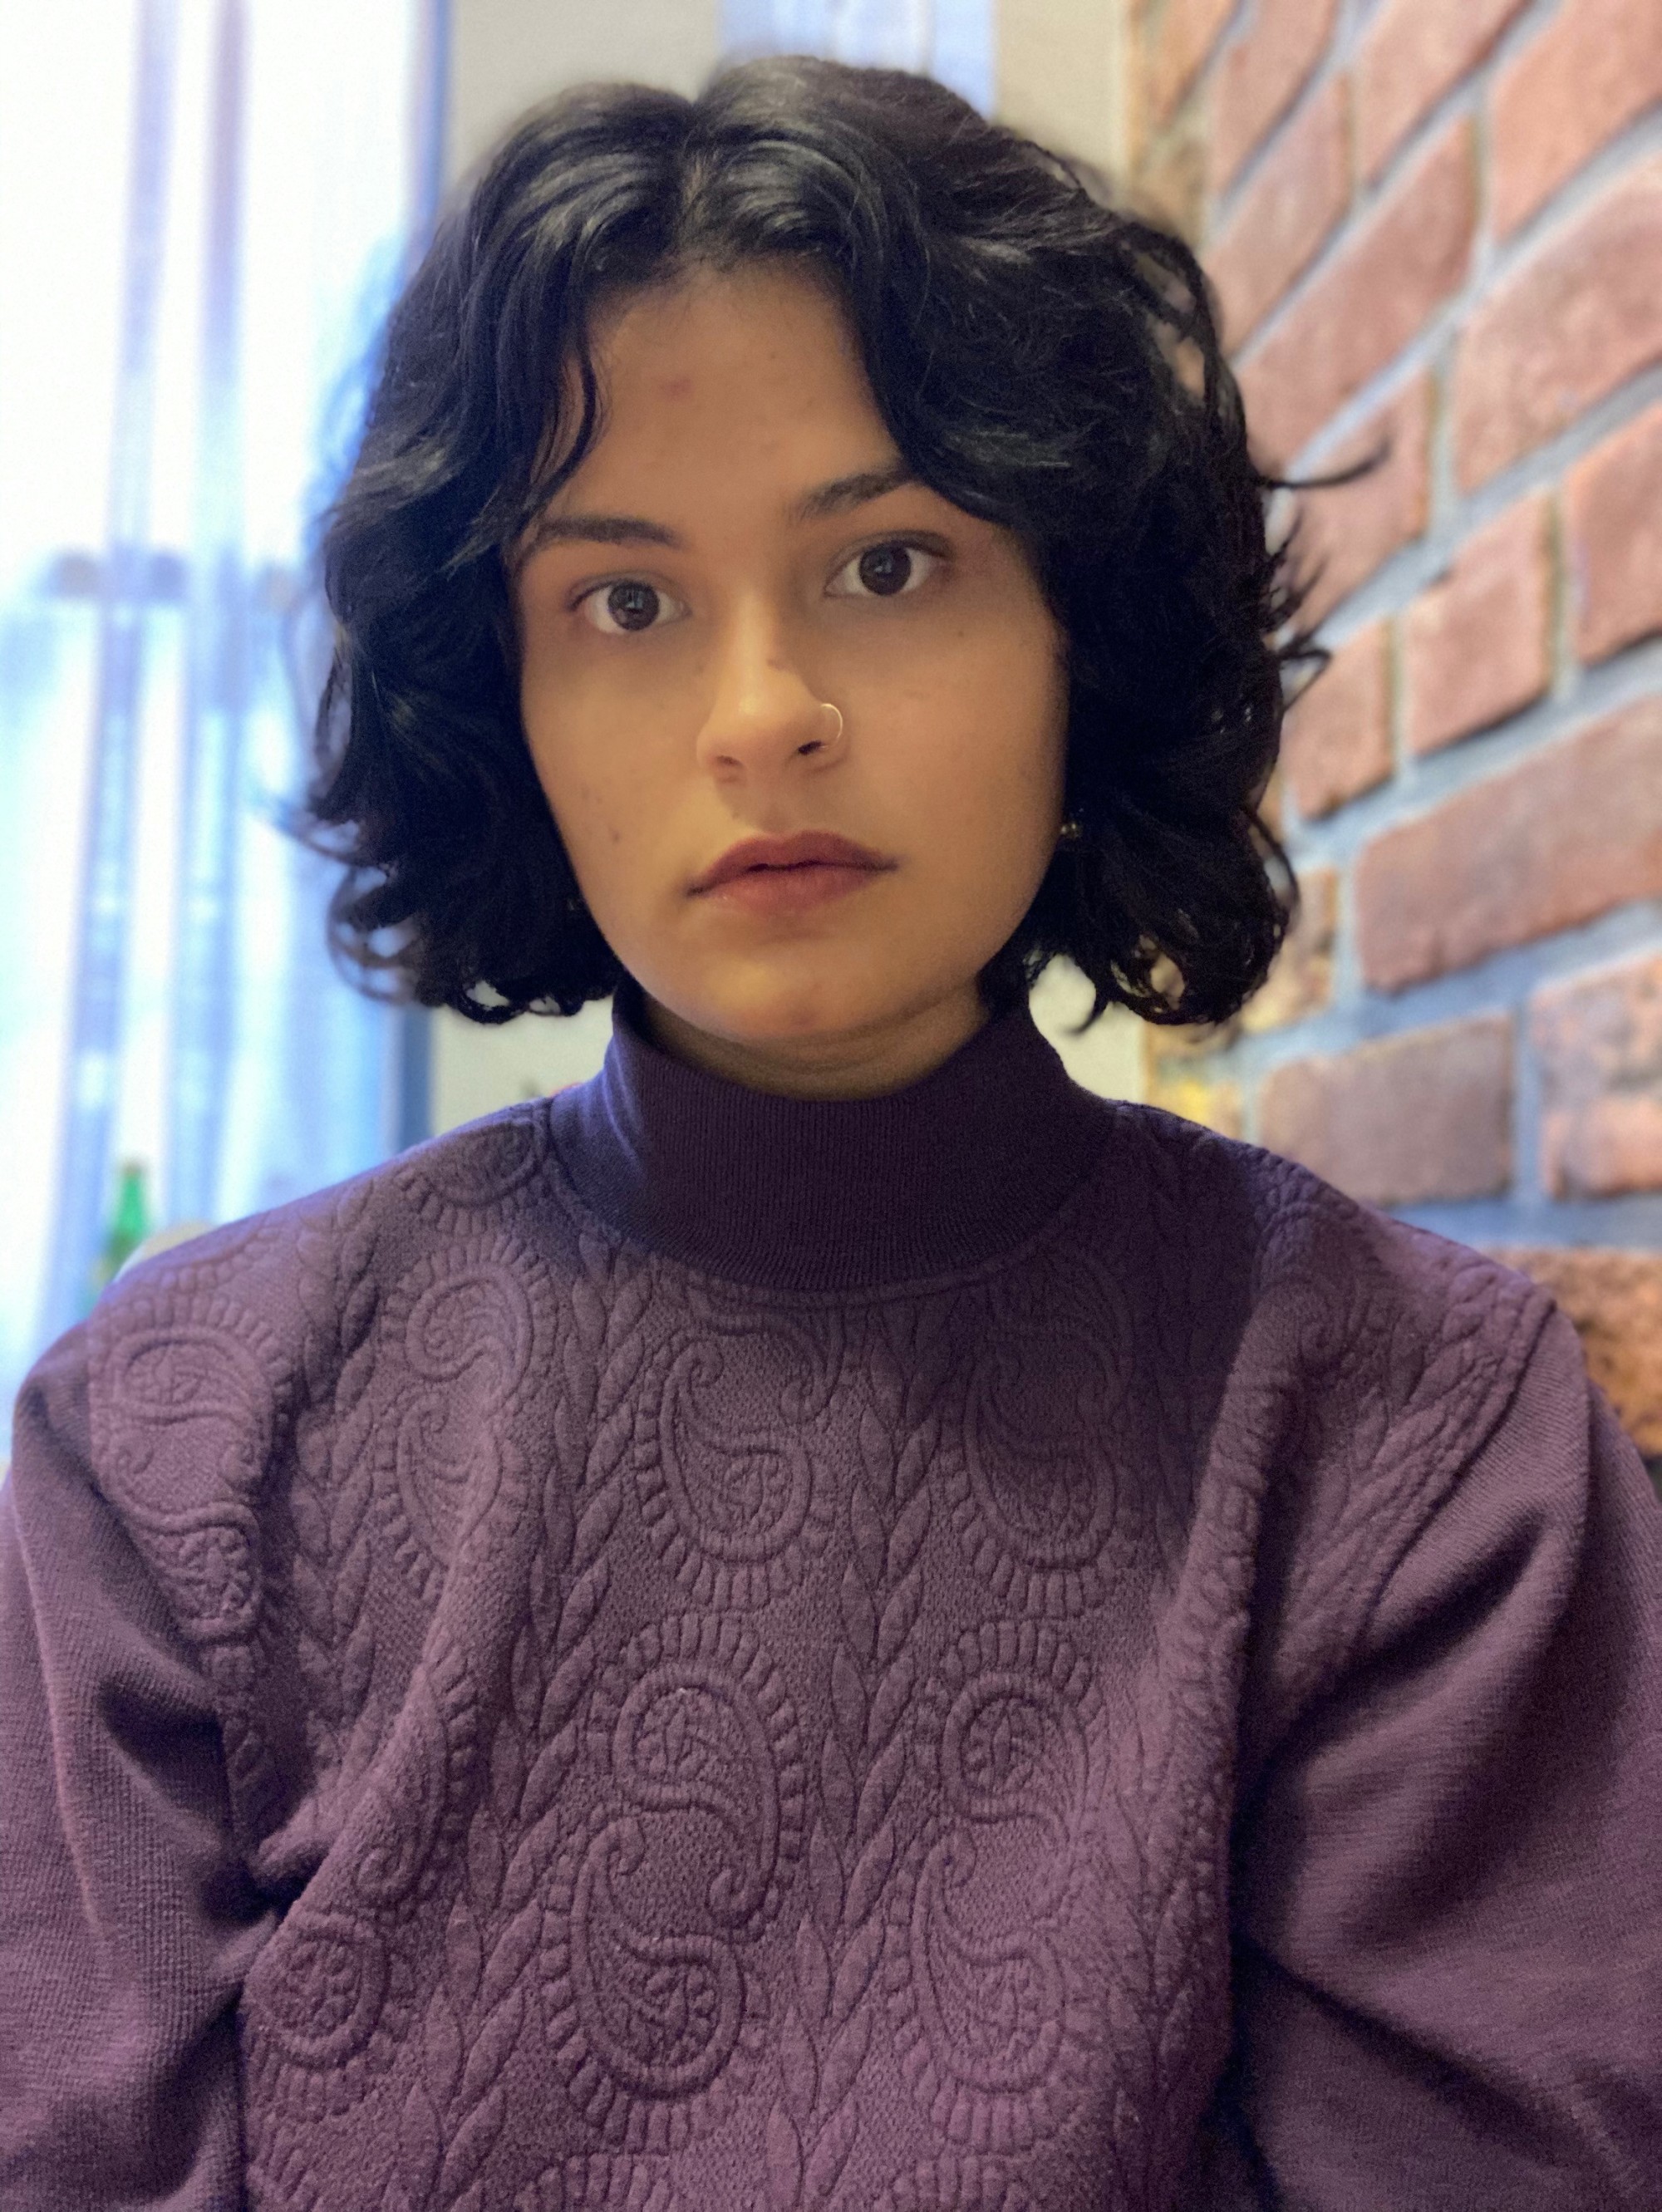 Serena Devi sits in front of a window next to a brick wall wearing a purple turtleneck with paisley texturing